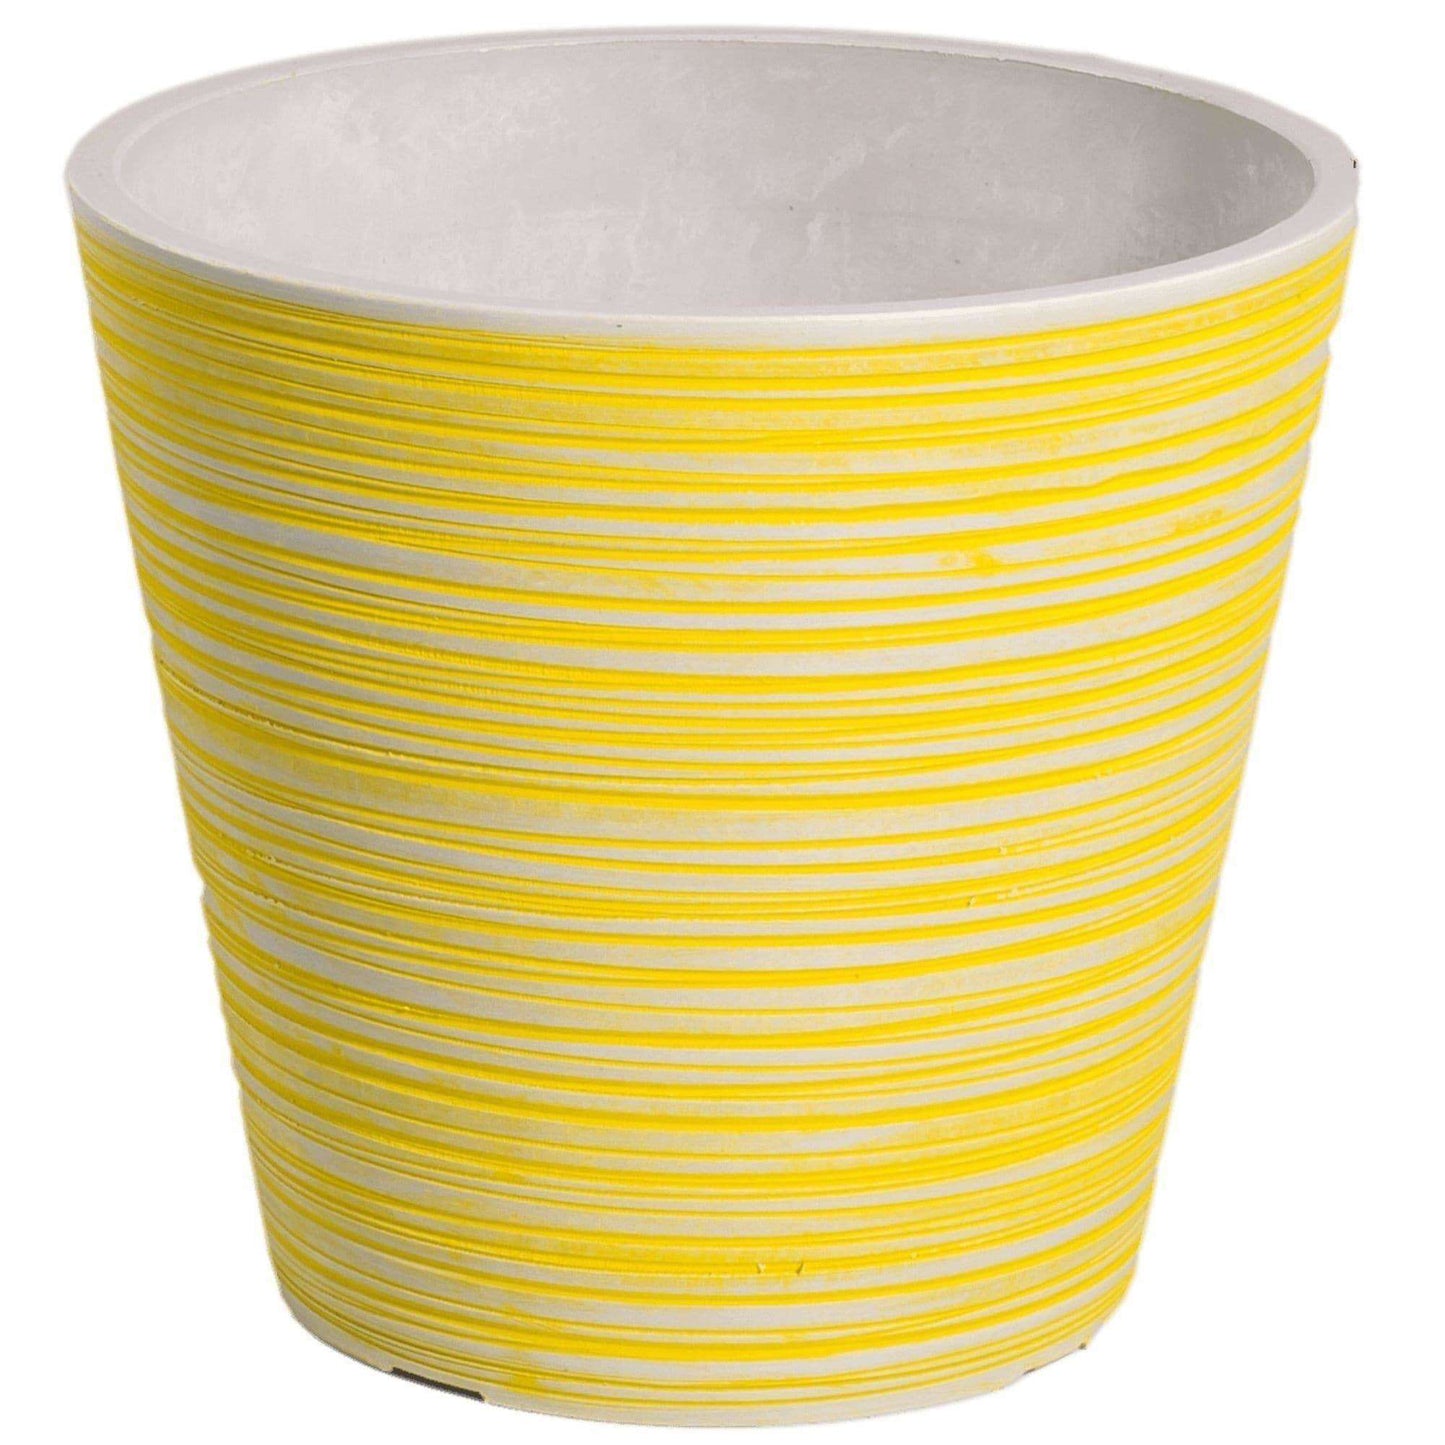 Yellow and White Engraved Pot 14cm